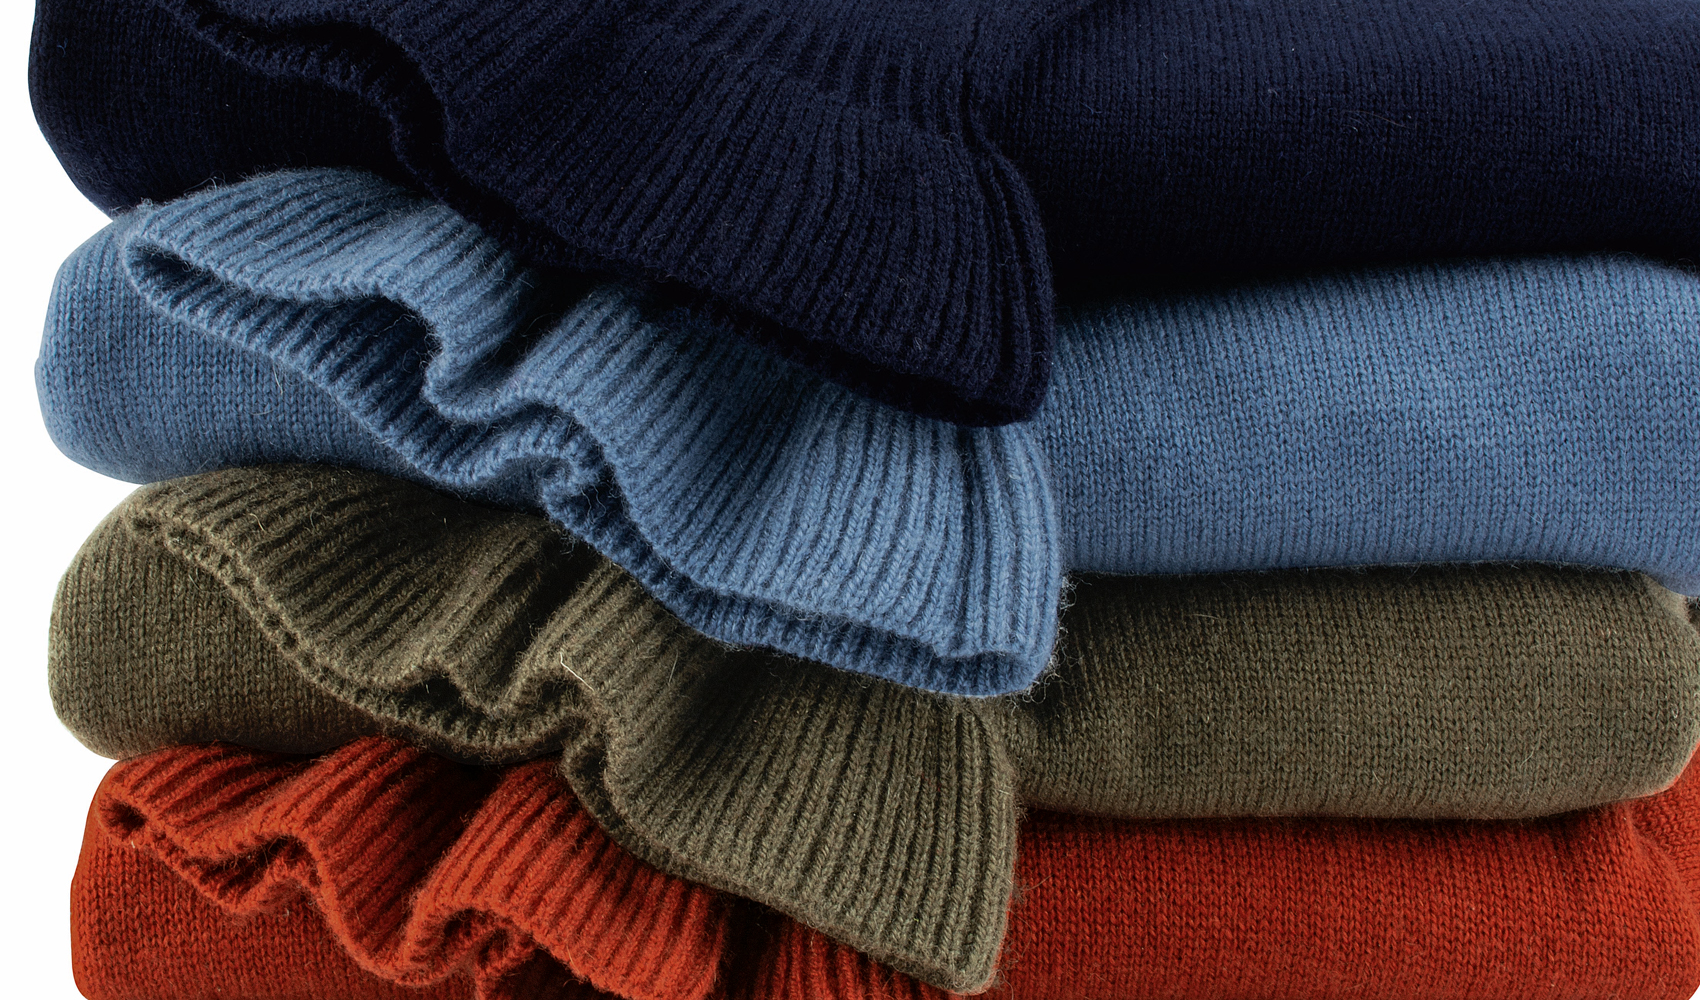 Cashmere: What it is and how to care for it